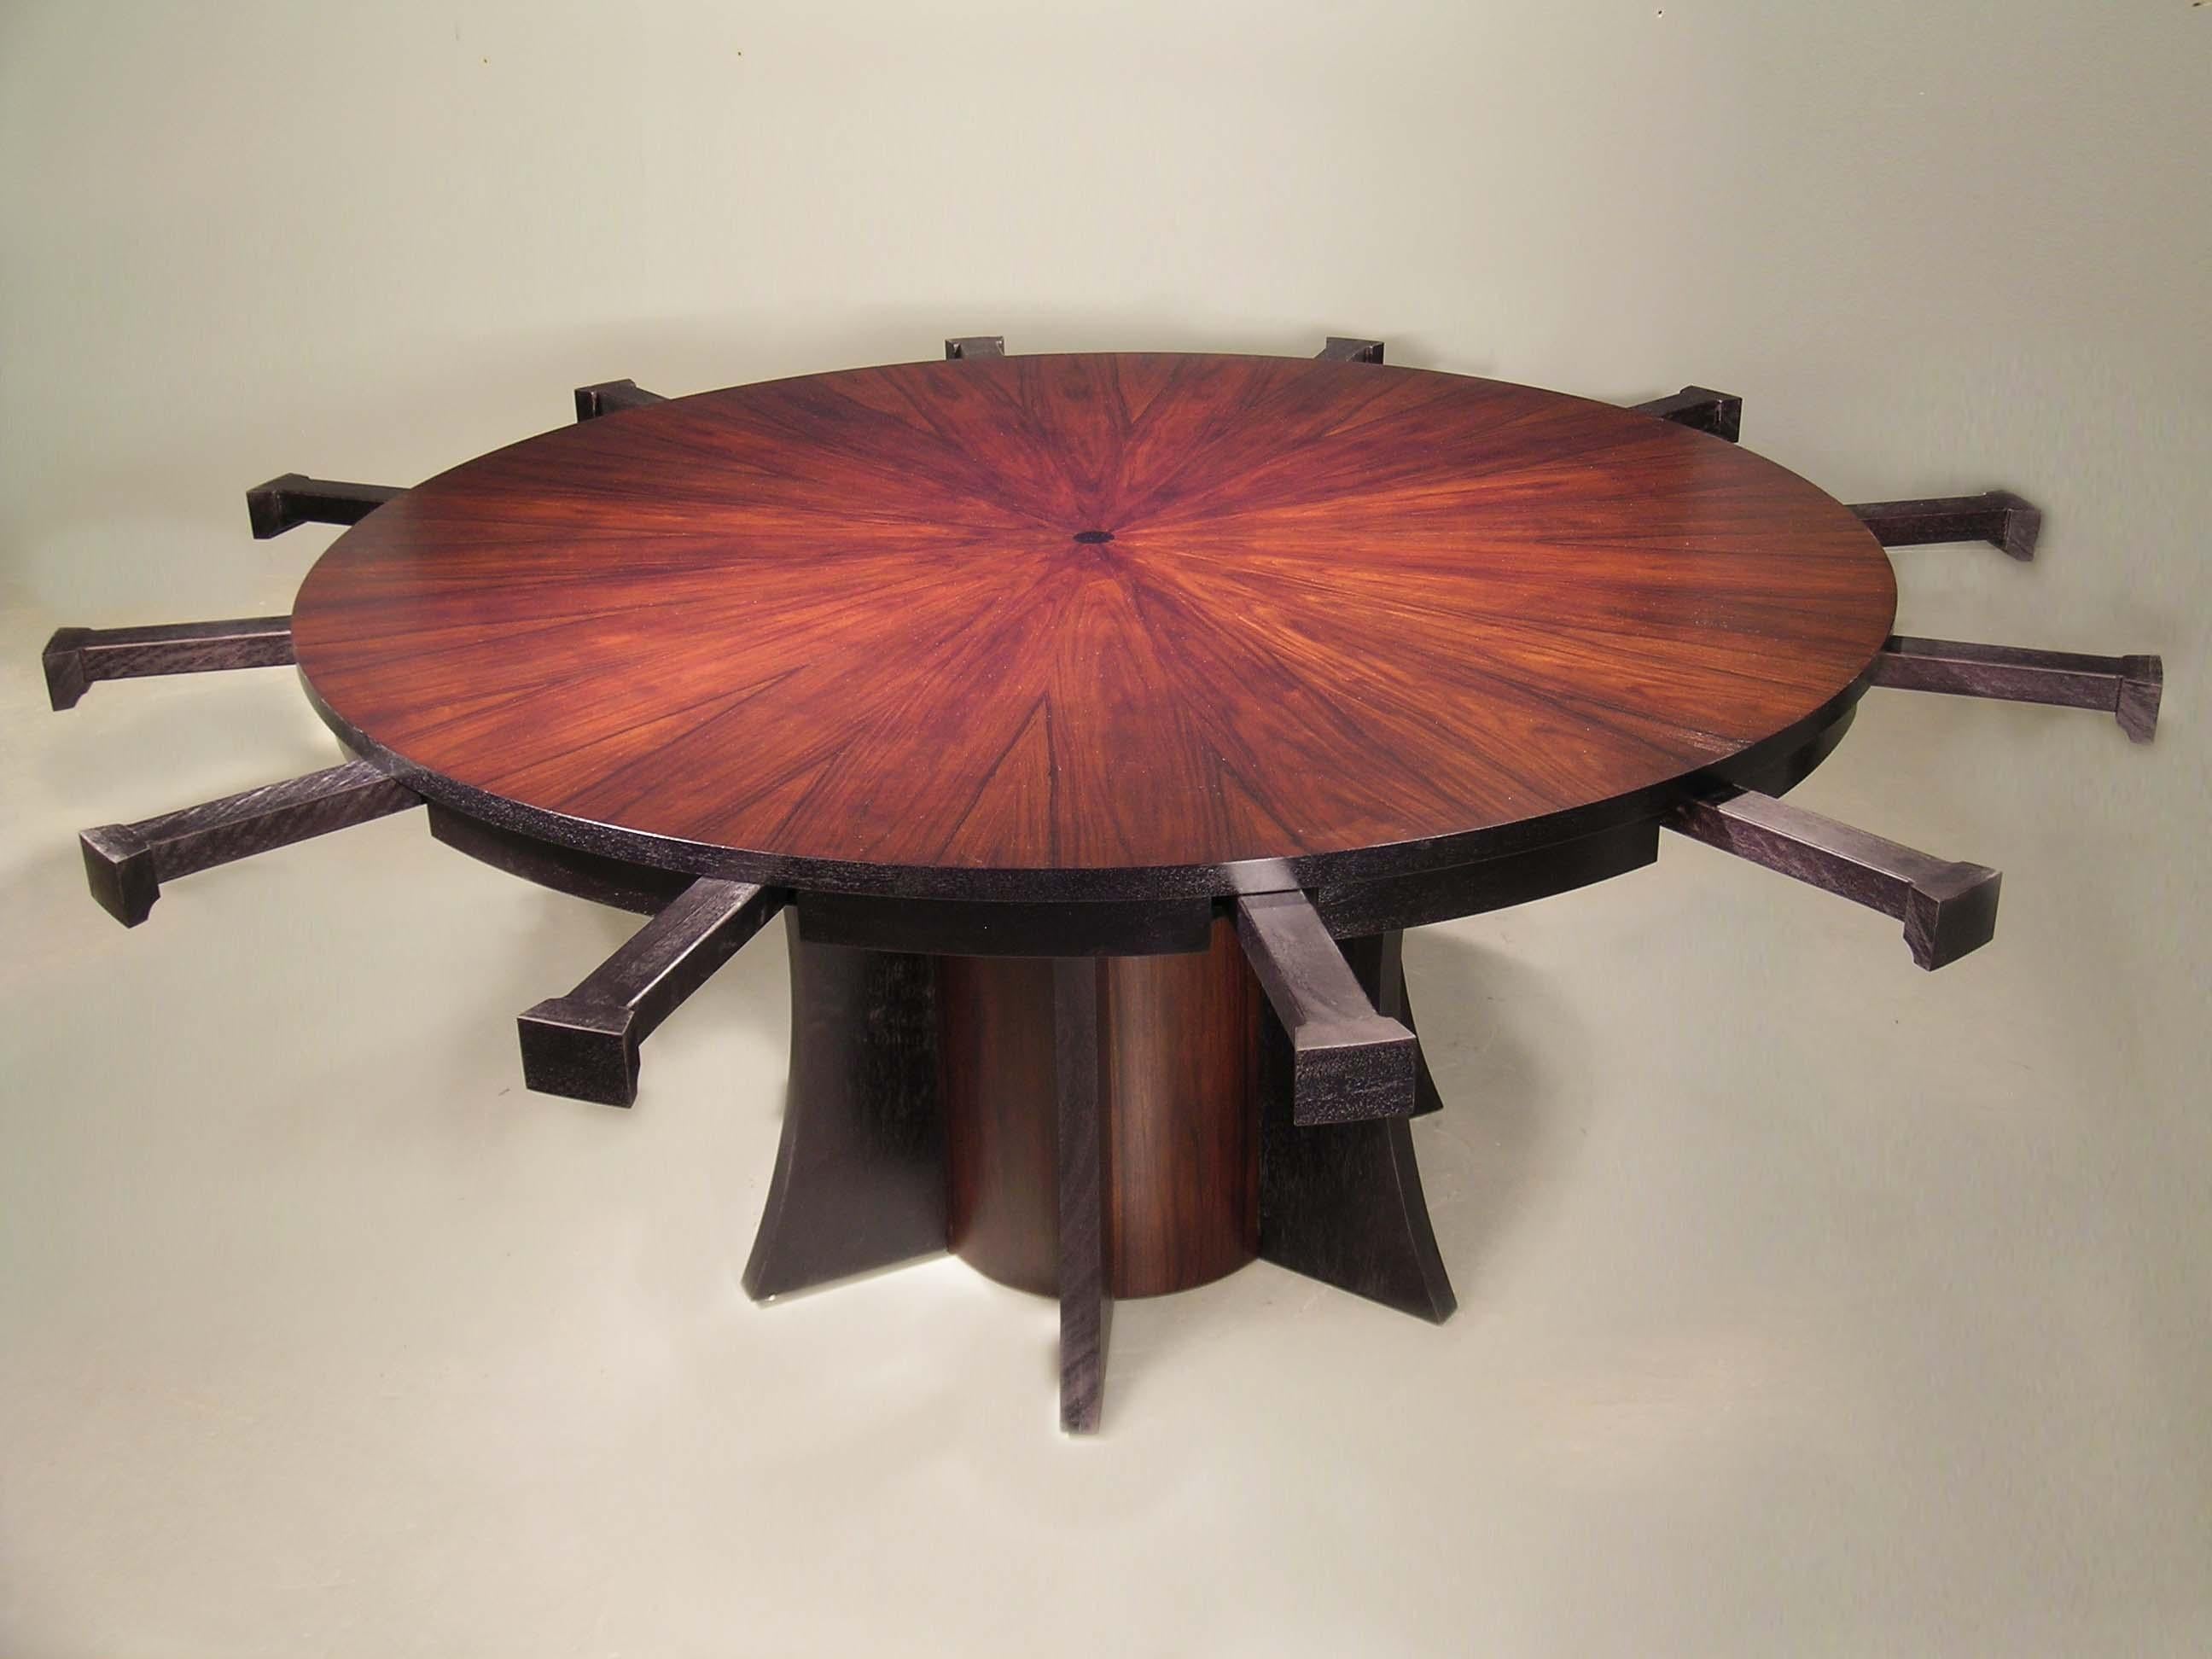 This large round dining table expands with curved leaves that rest on pull out brackets. The table top is a starburst patterned rosewood. The leaves are black mahogany. The pedestal bas is rosewood with black mahogany wings.
Without the leaves the